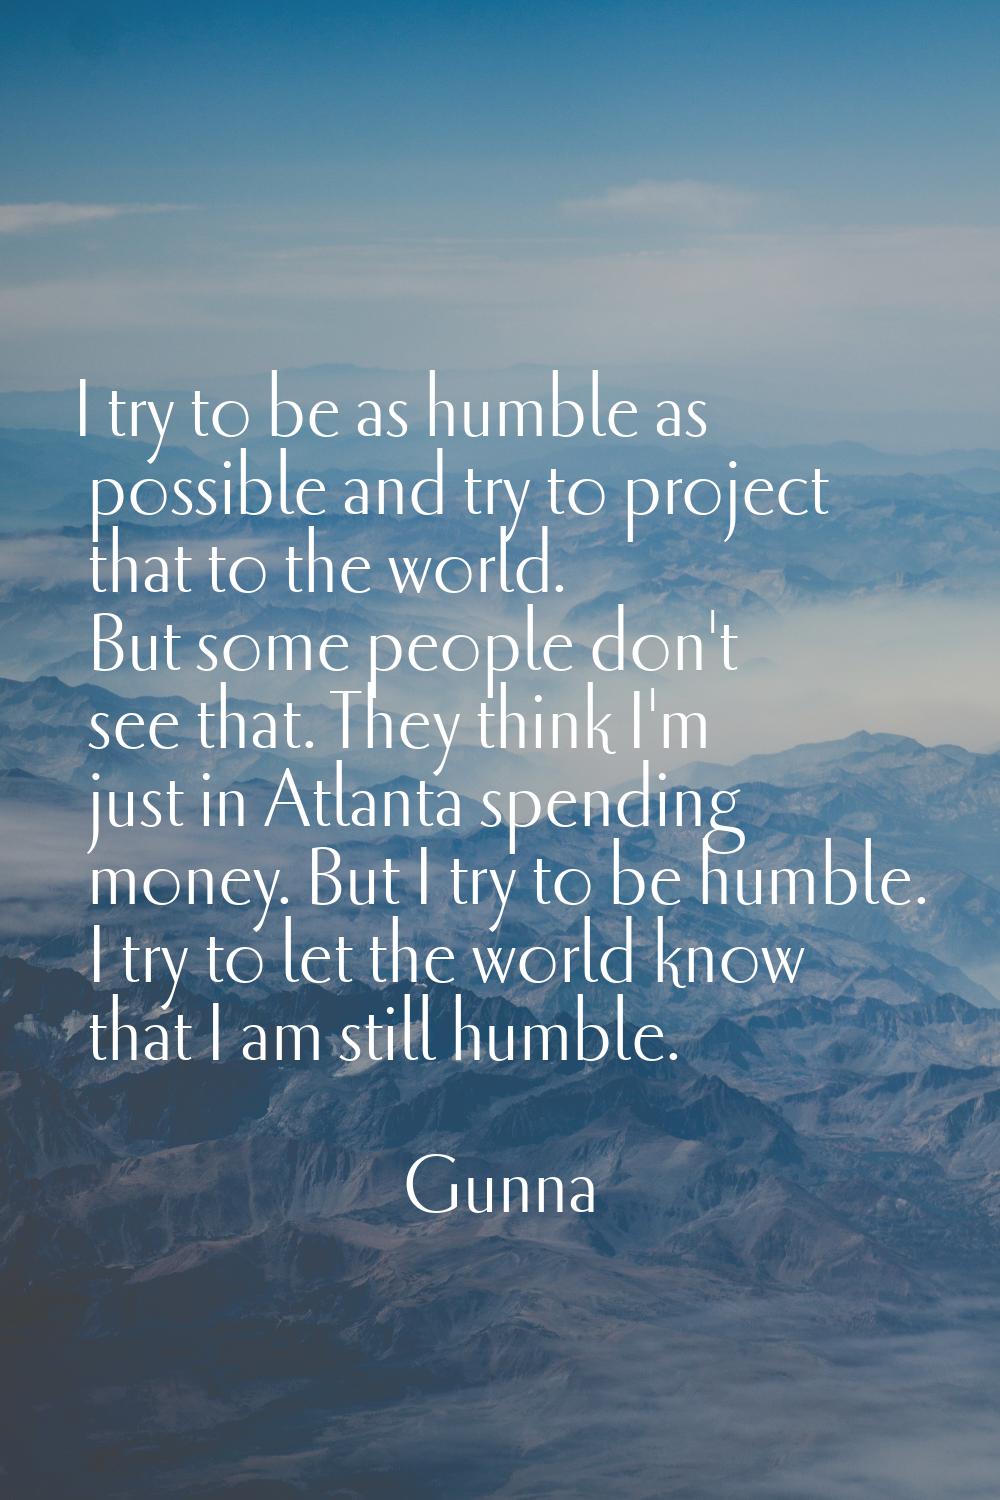 I try to be as humble as possible and try to project that to the world. But some people don't see t